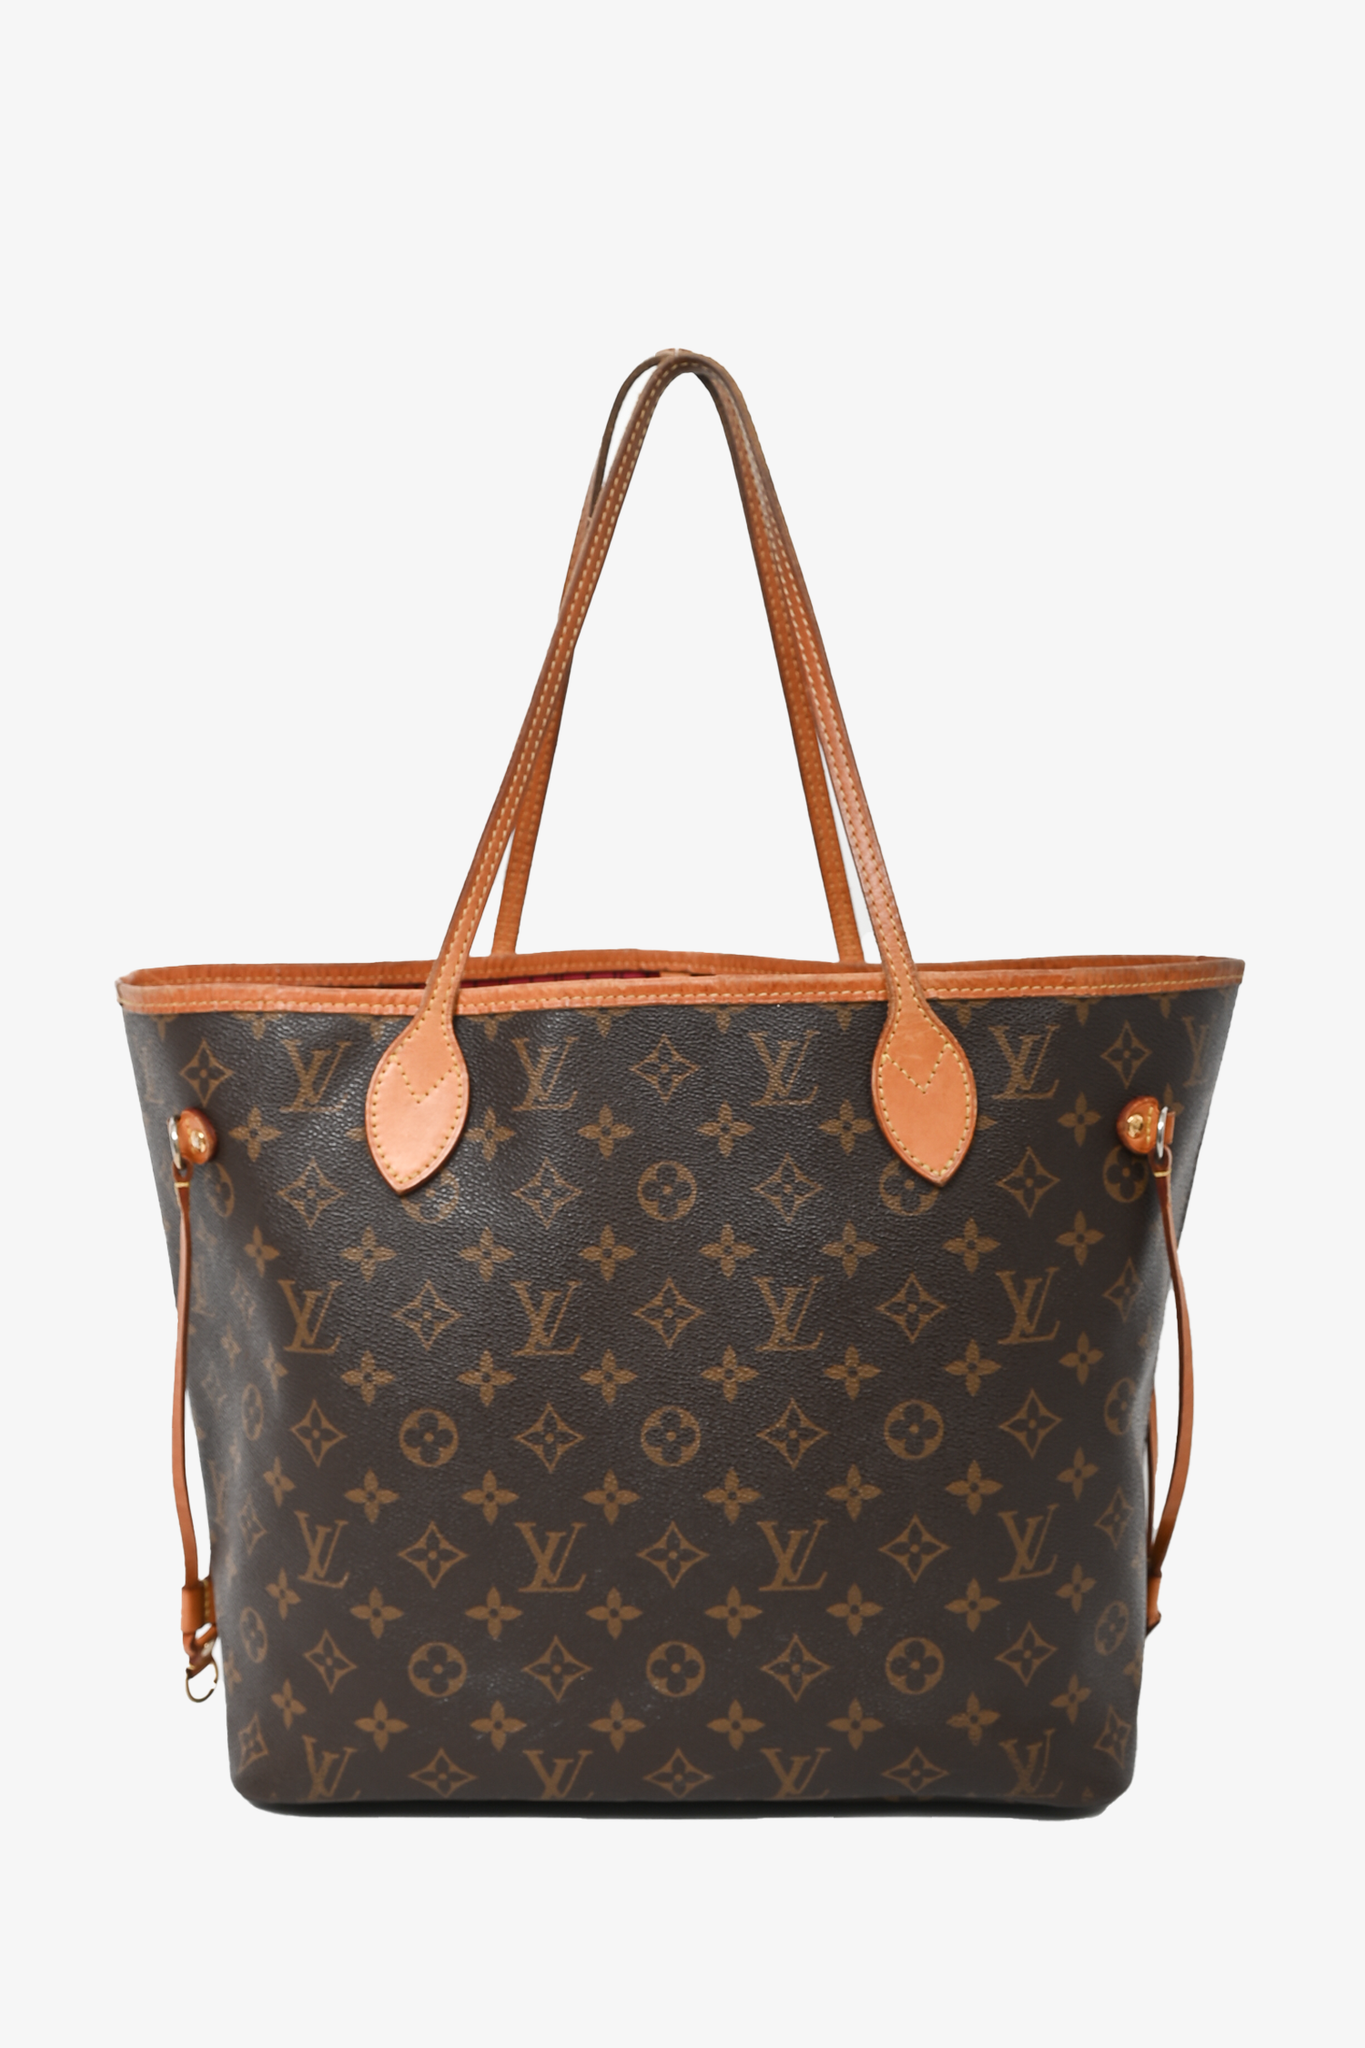 Authentic Louis Vuitton Neverfull MM Damier Azur - clothing & accessories -  by owner - apparel sale - craigslist